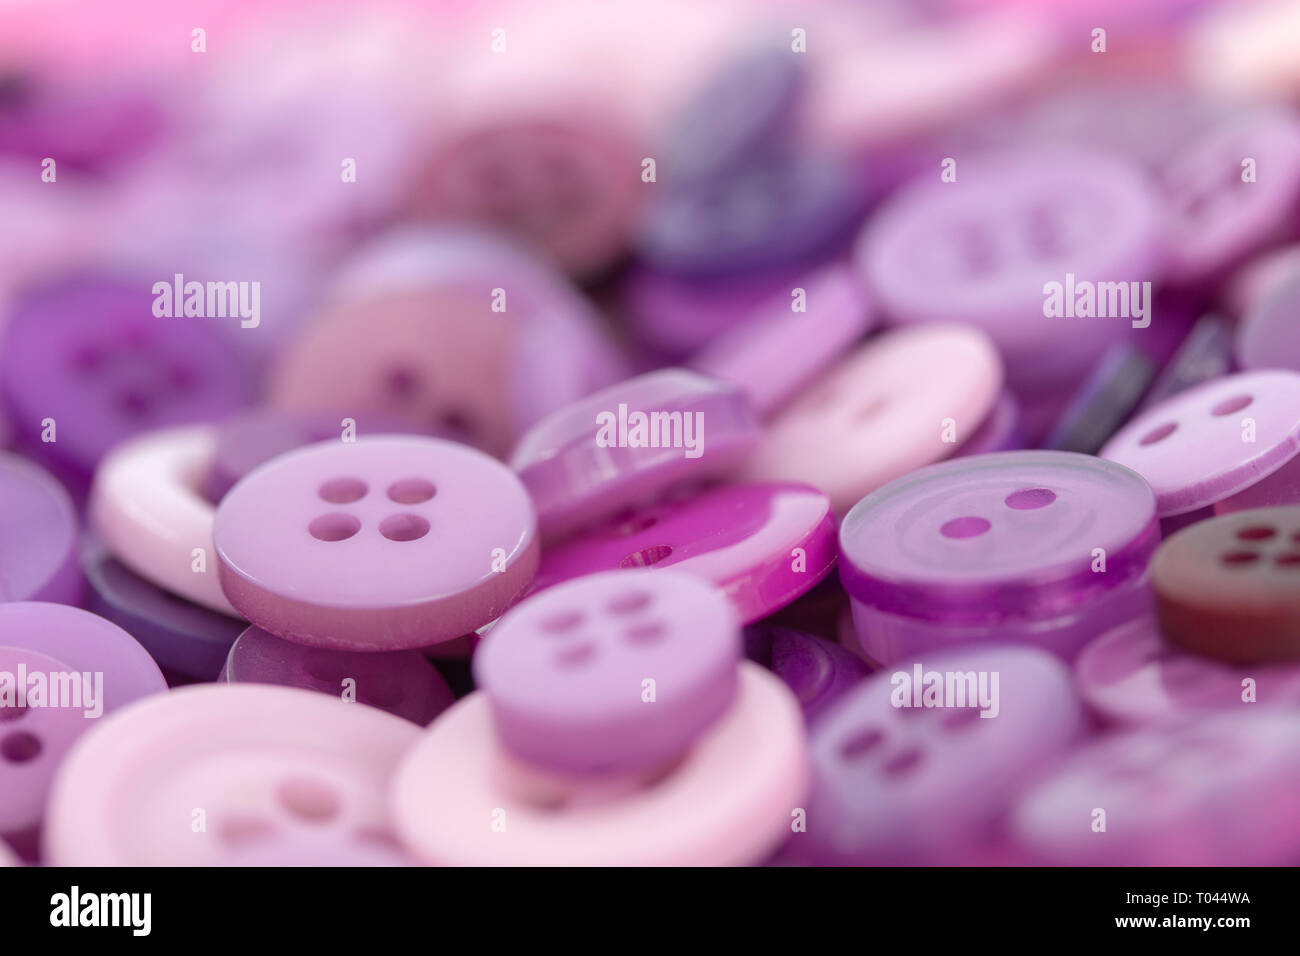 Closeup image of pink and purple sewing buttons Stock Photo